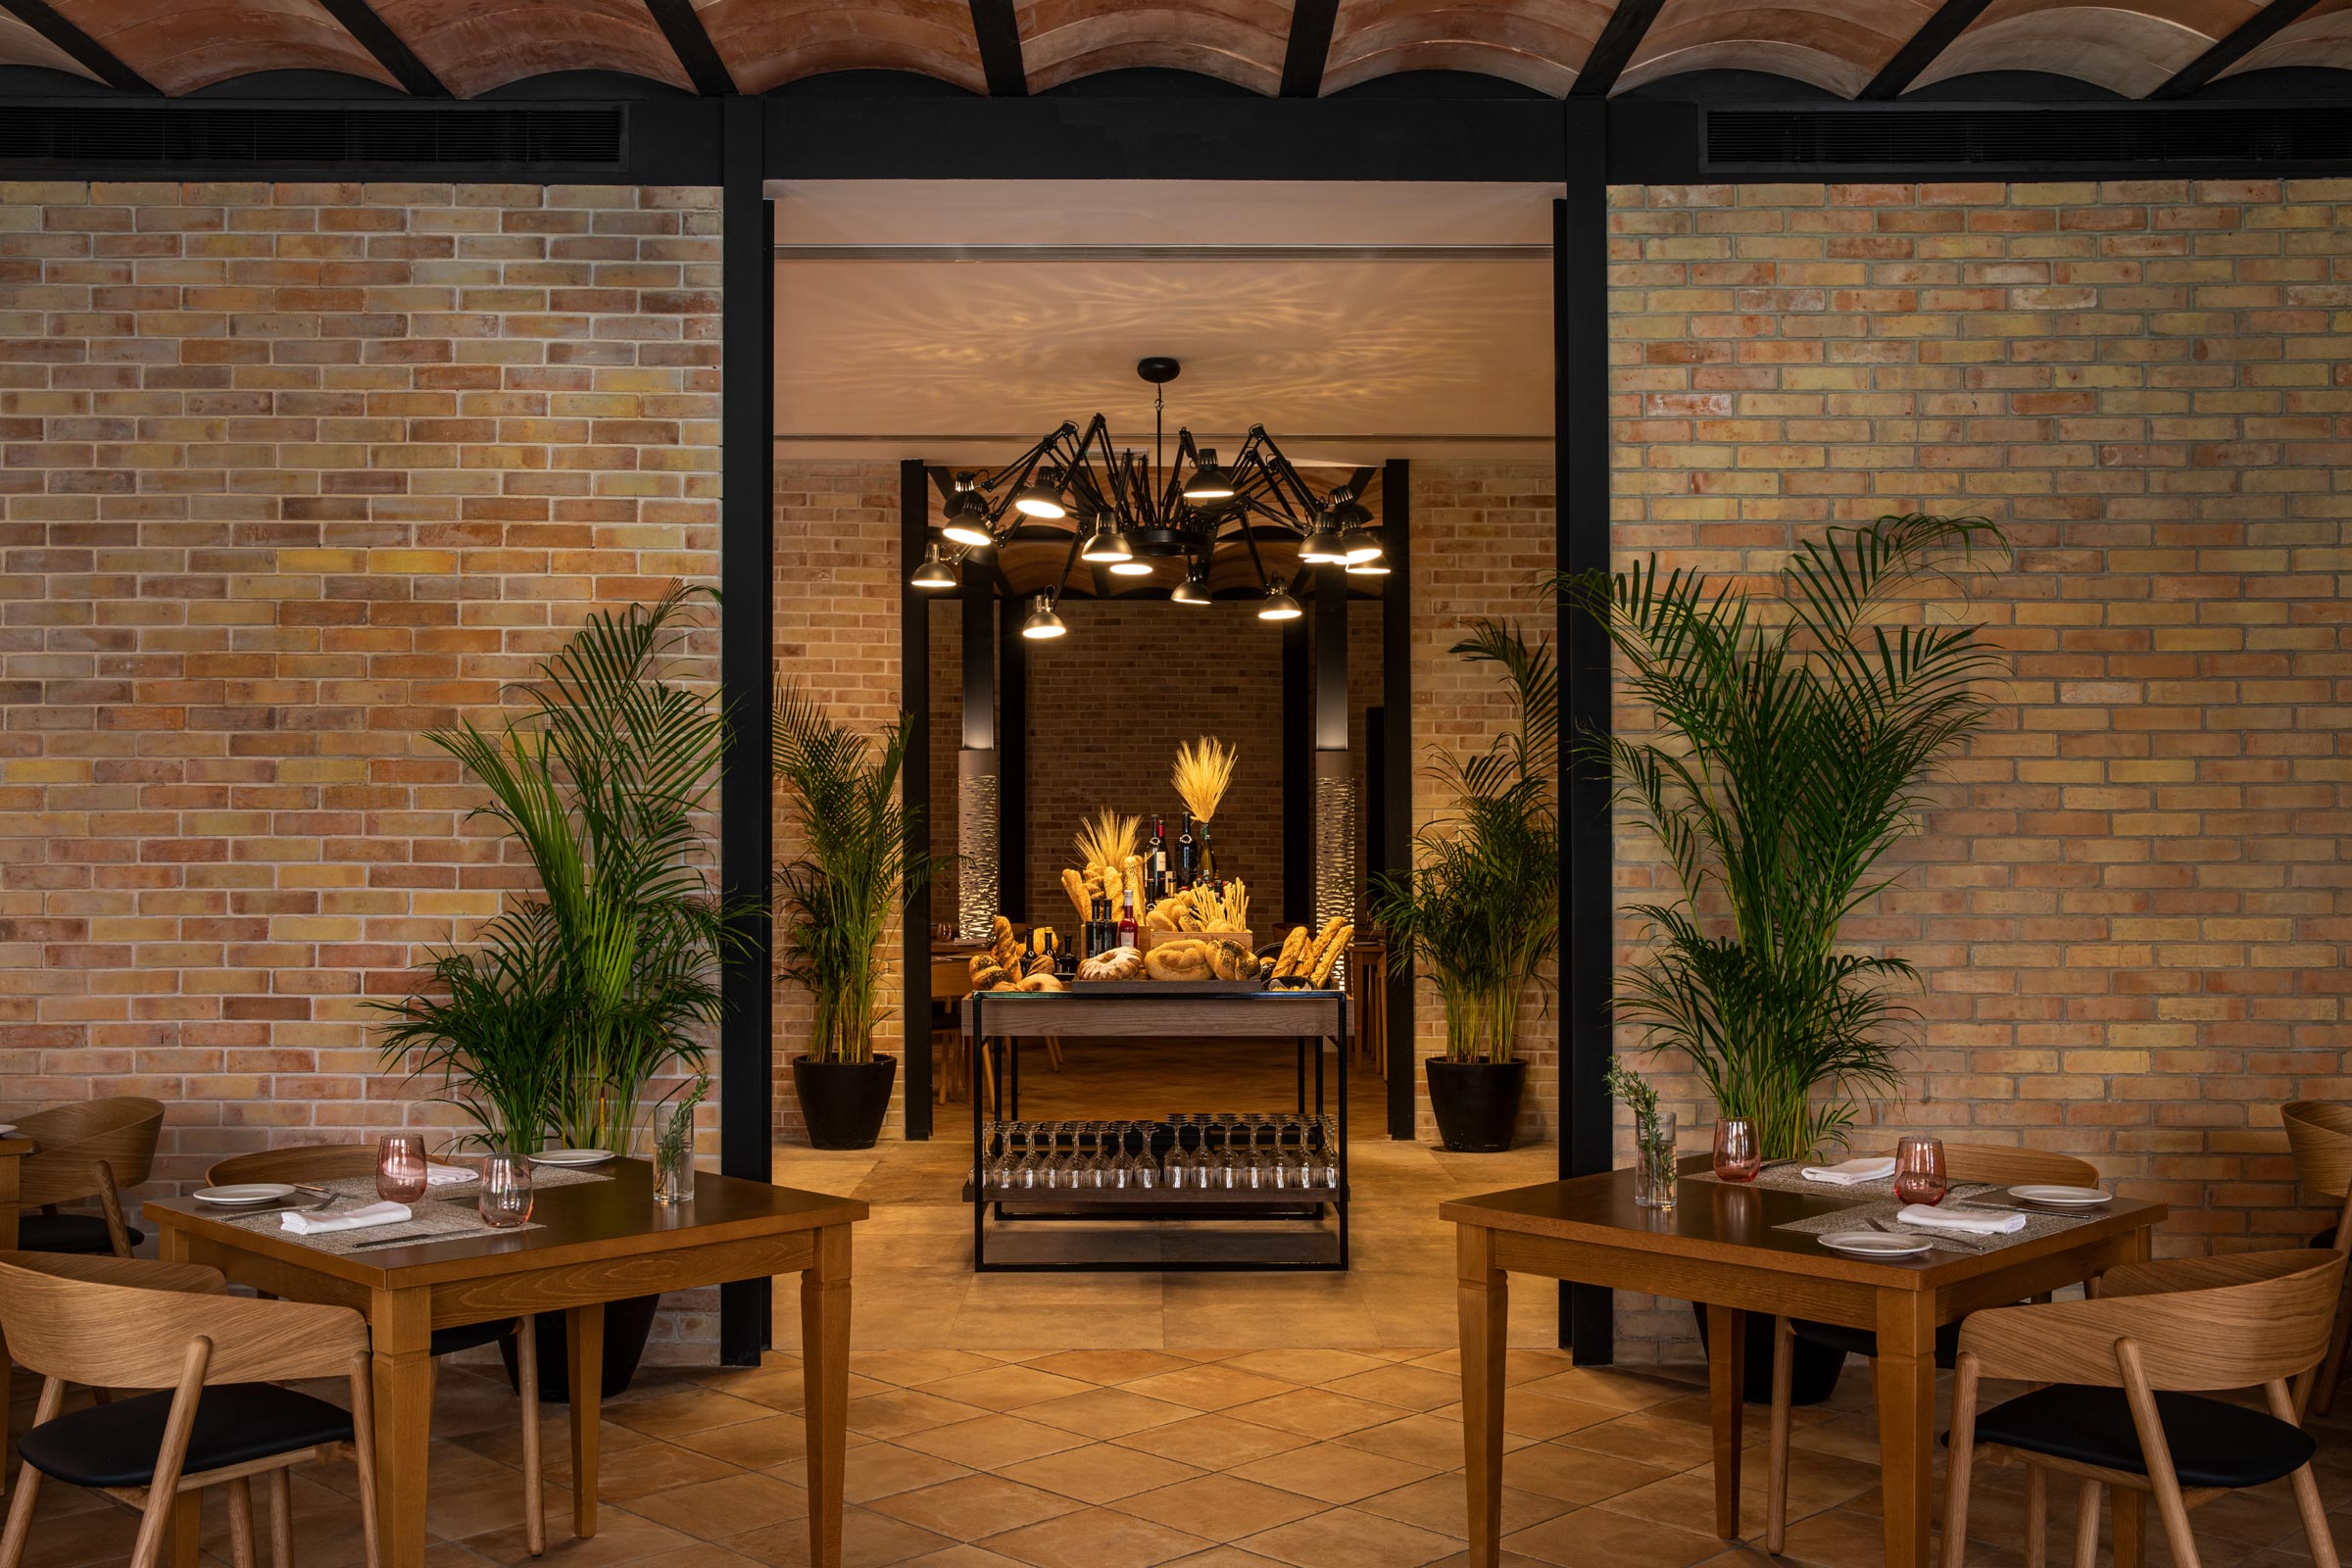 The Grill Upscale Restaurant grilled meats to perfection await at Excellence Riviera Cancun